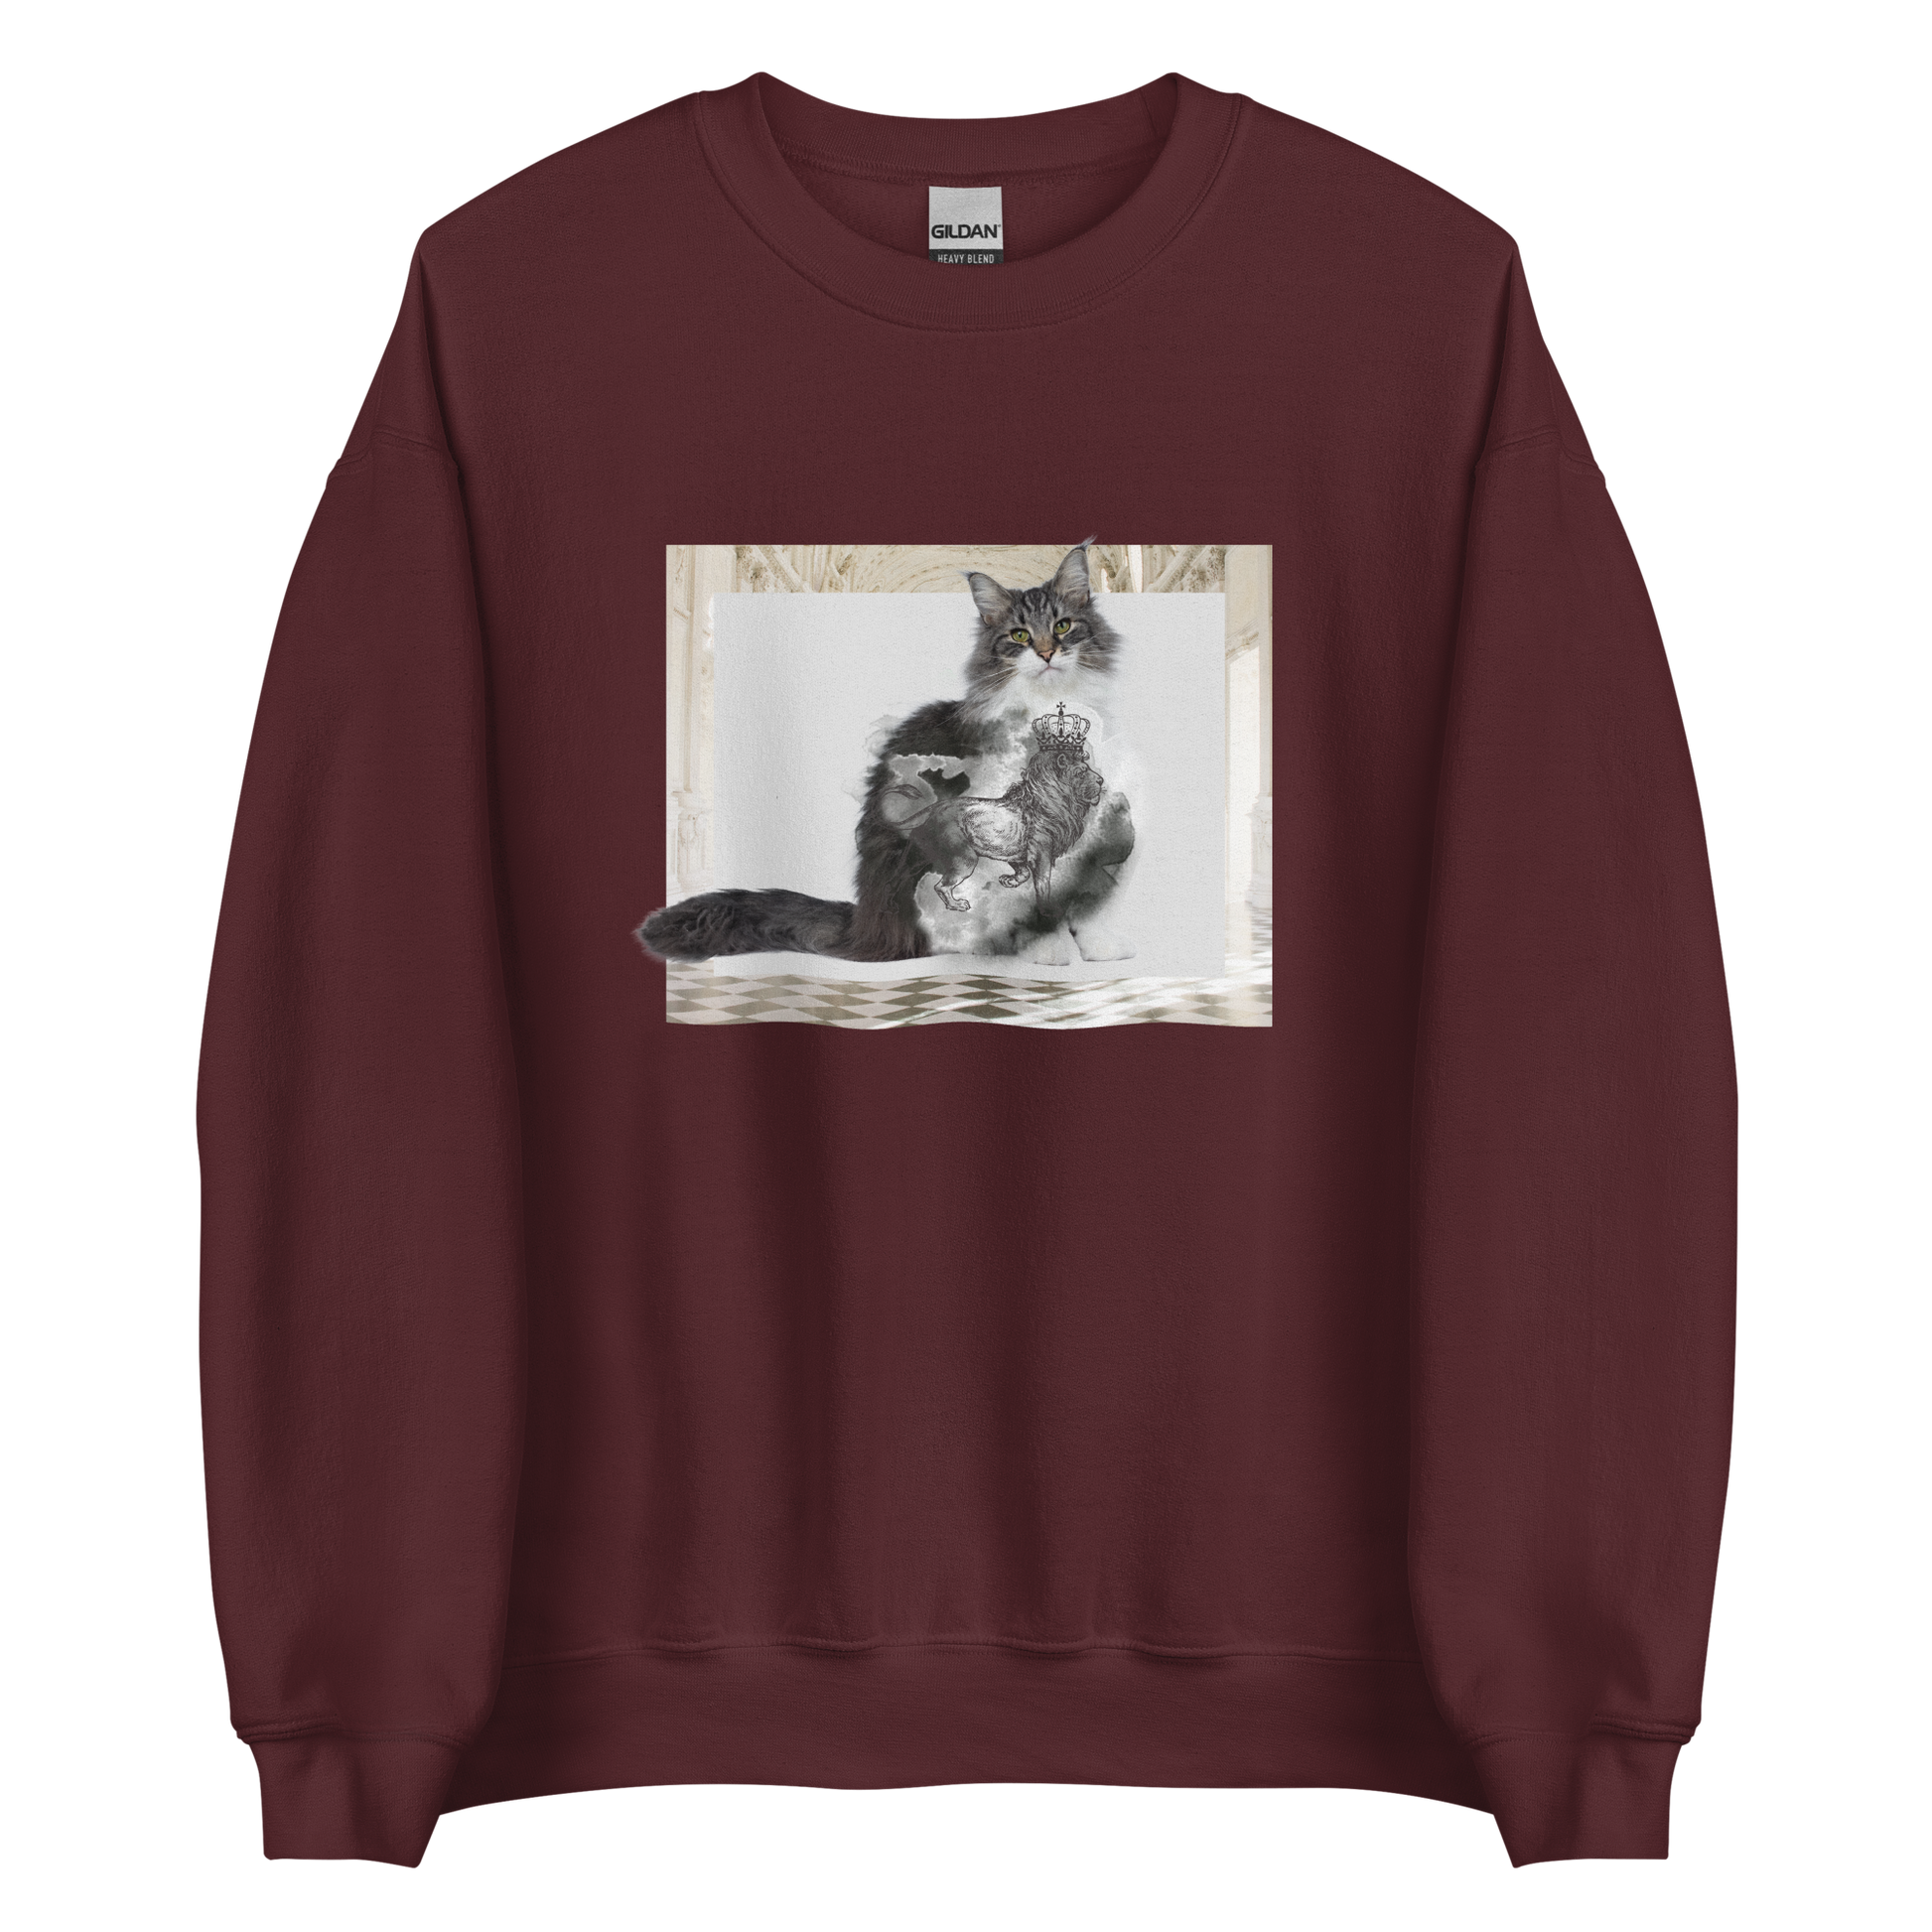 Maroon Royal Cat Sweatshirt featuring a Majestic Cat graphic on the chest - Cute Graphic Cat Sweatshirts - Boozy Fox